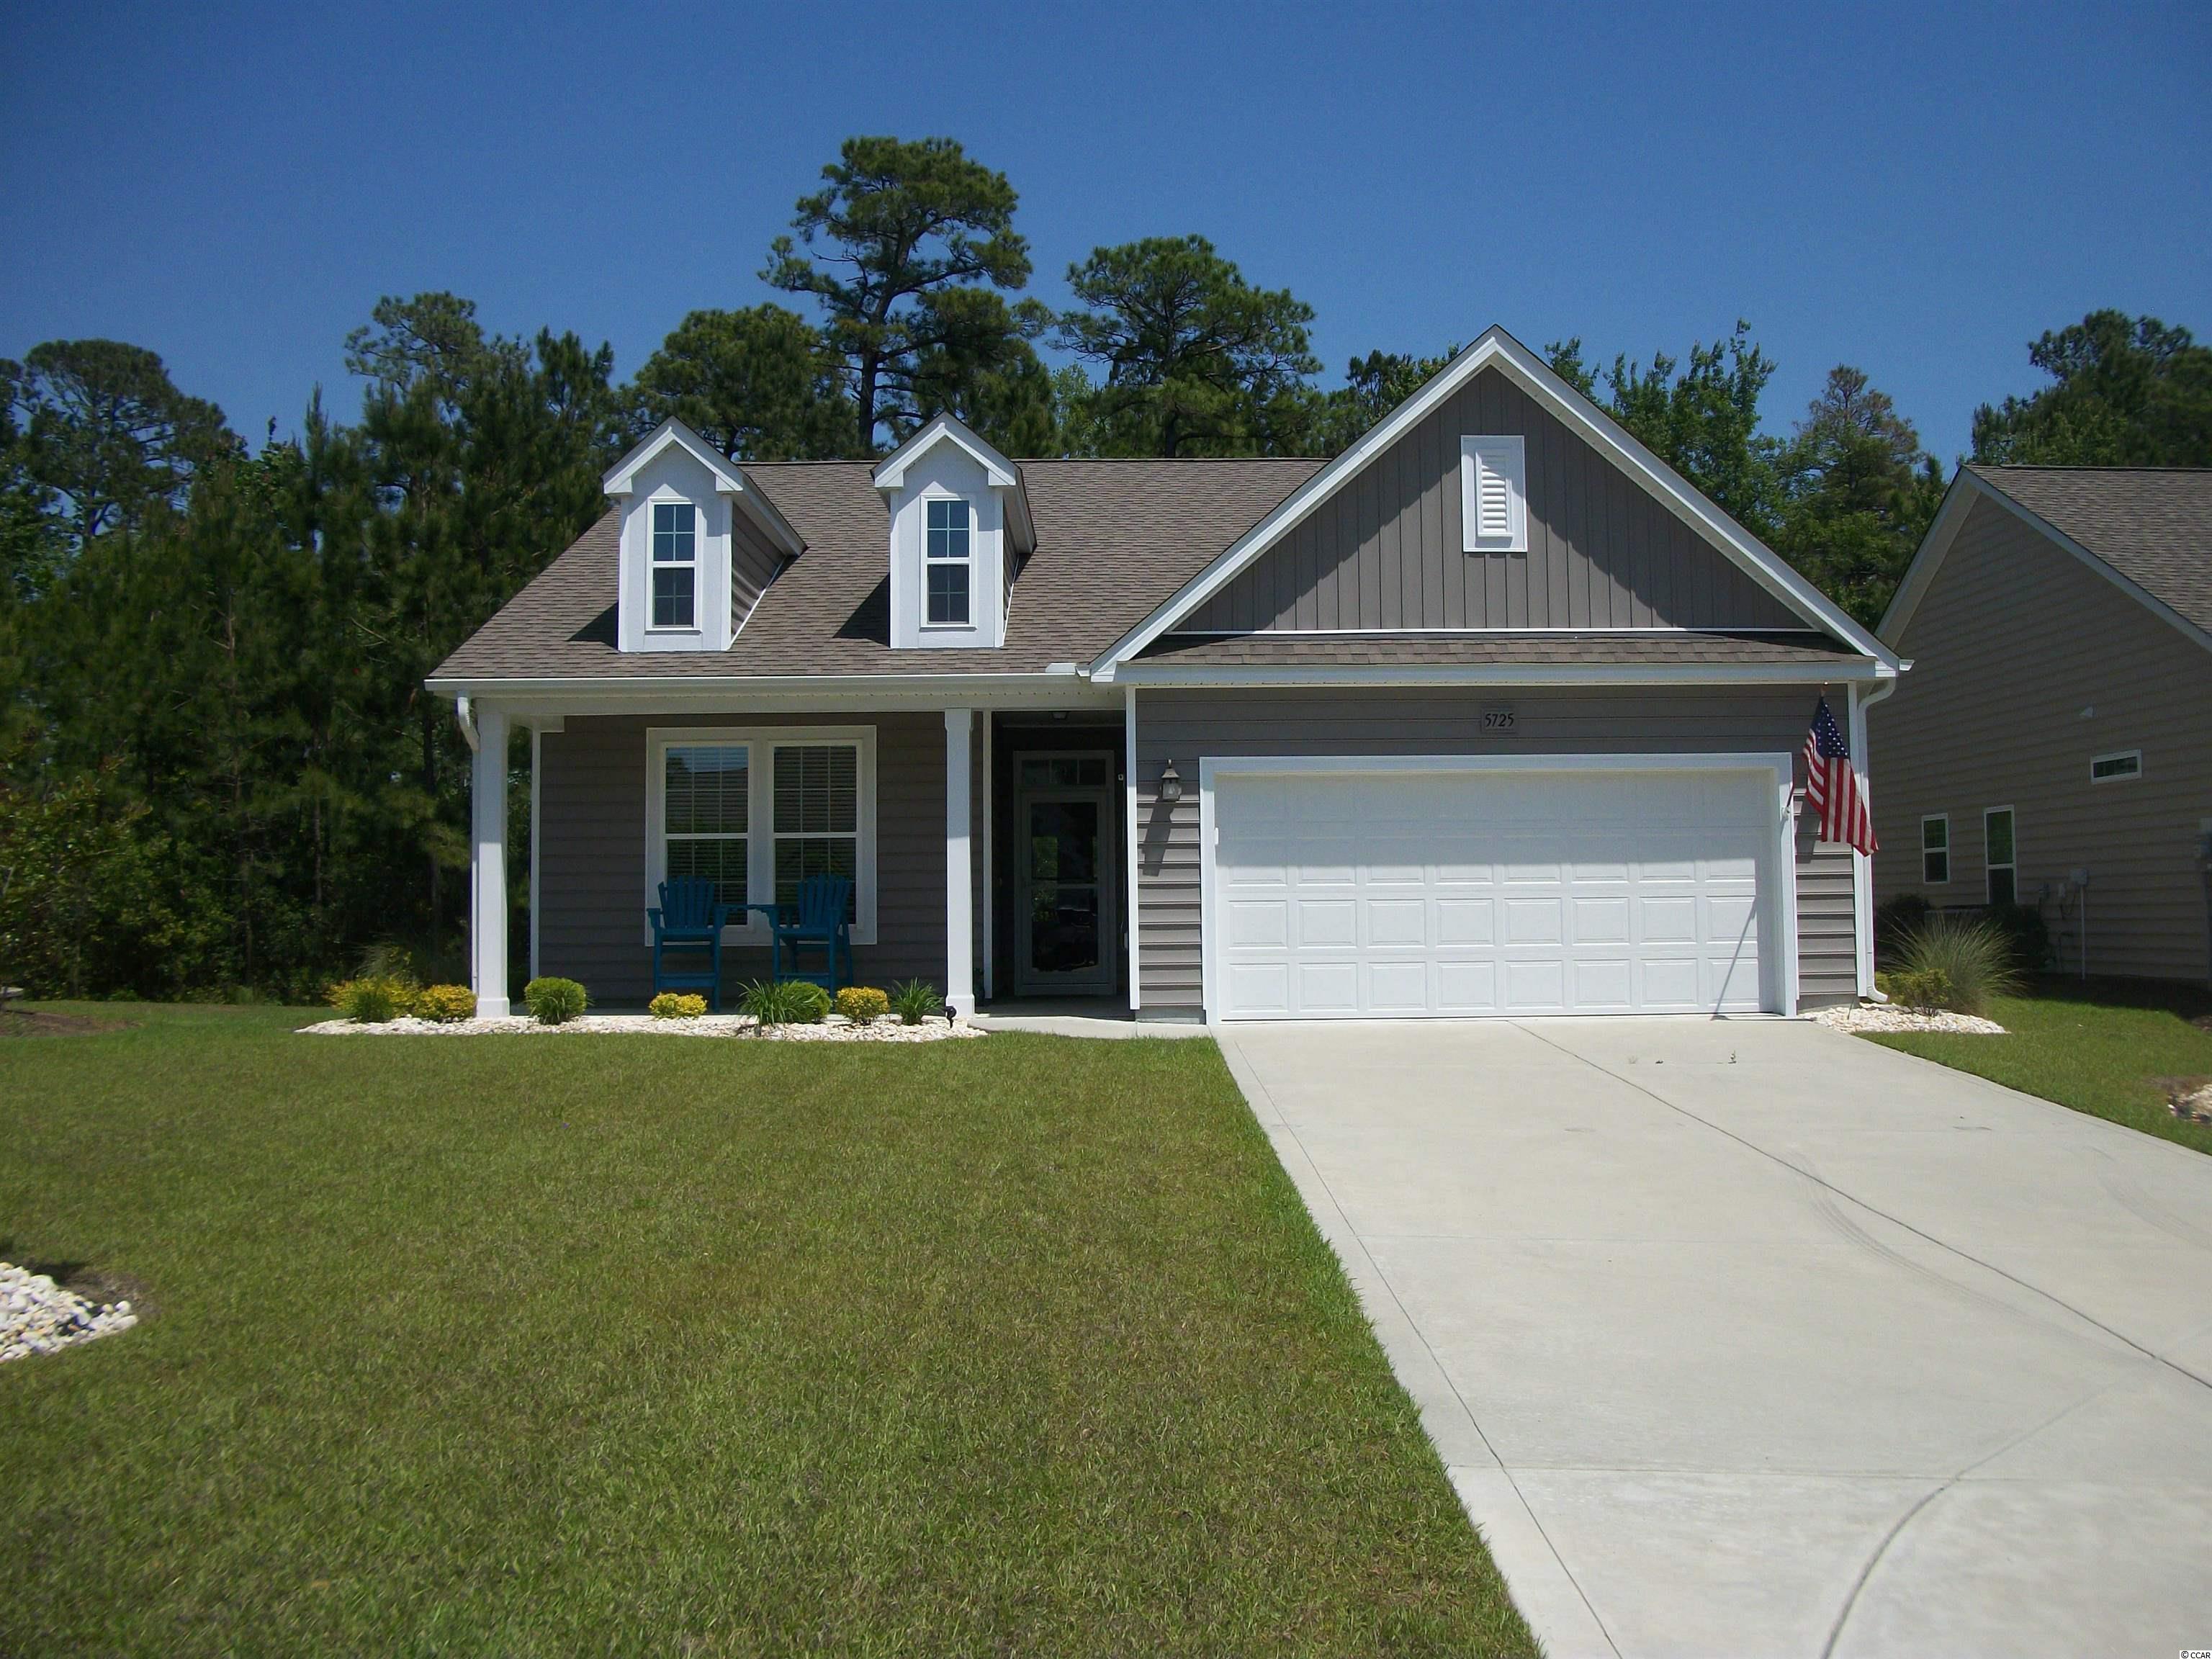 5725 Cottonseed Ct. Myrtle Beach, SC 29579